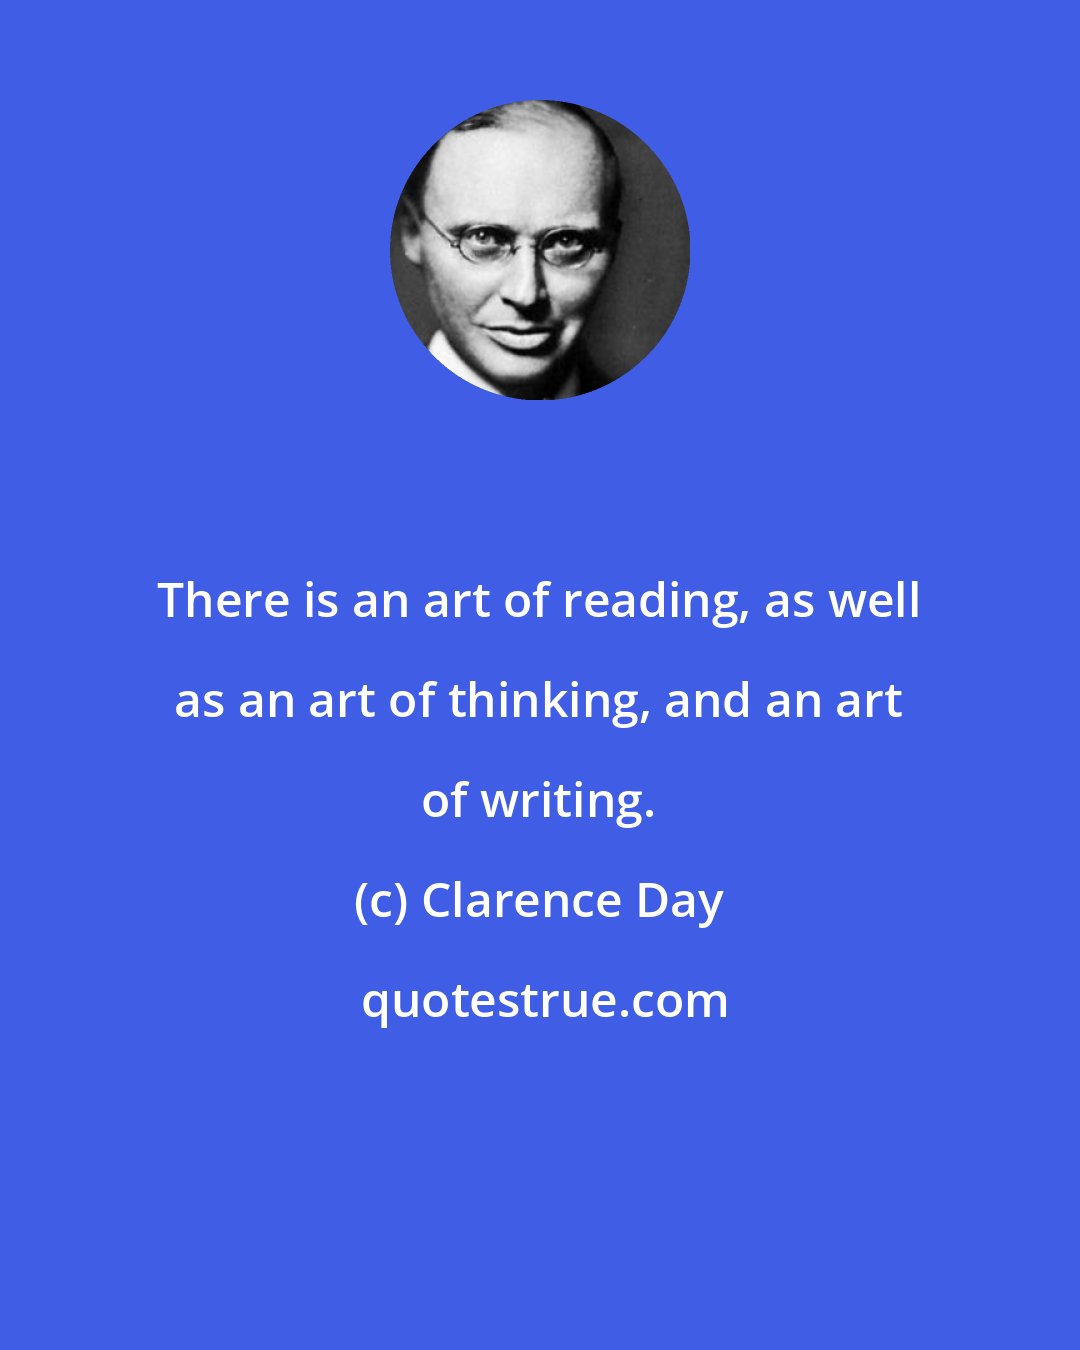 Clarence Day: There is an art of reading, as well as an art of thinking, and an art of writing.